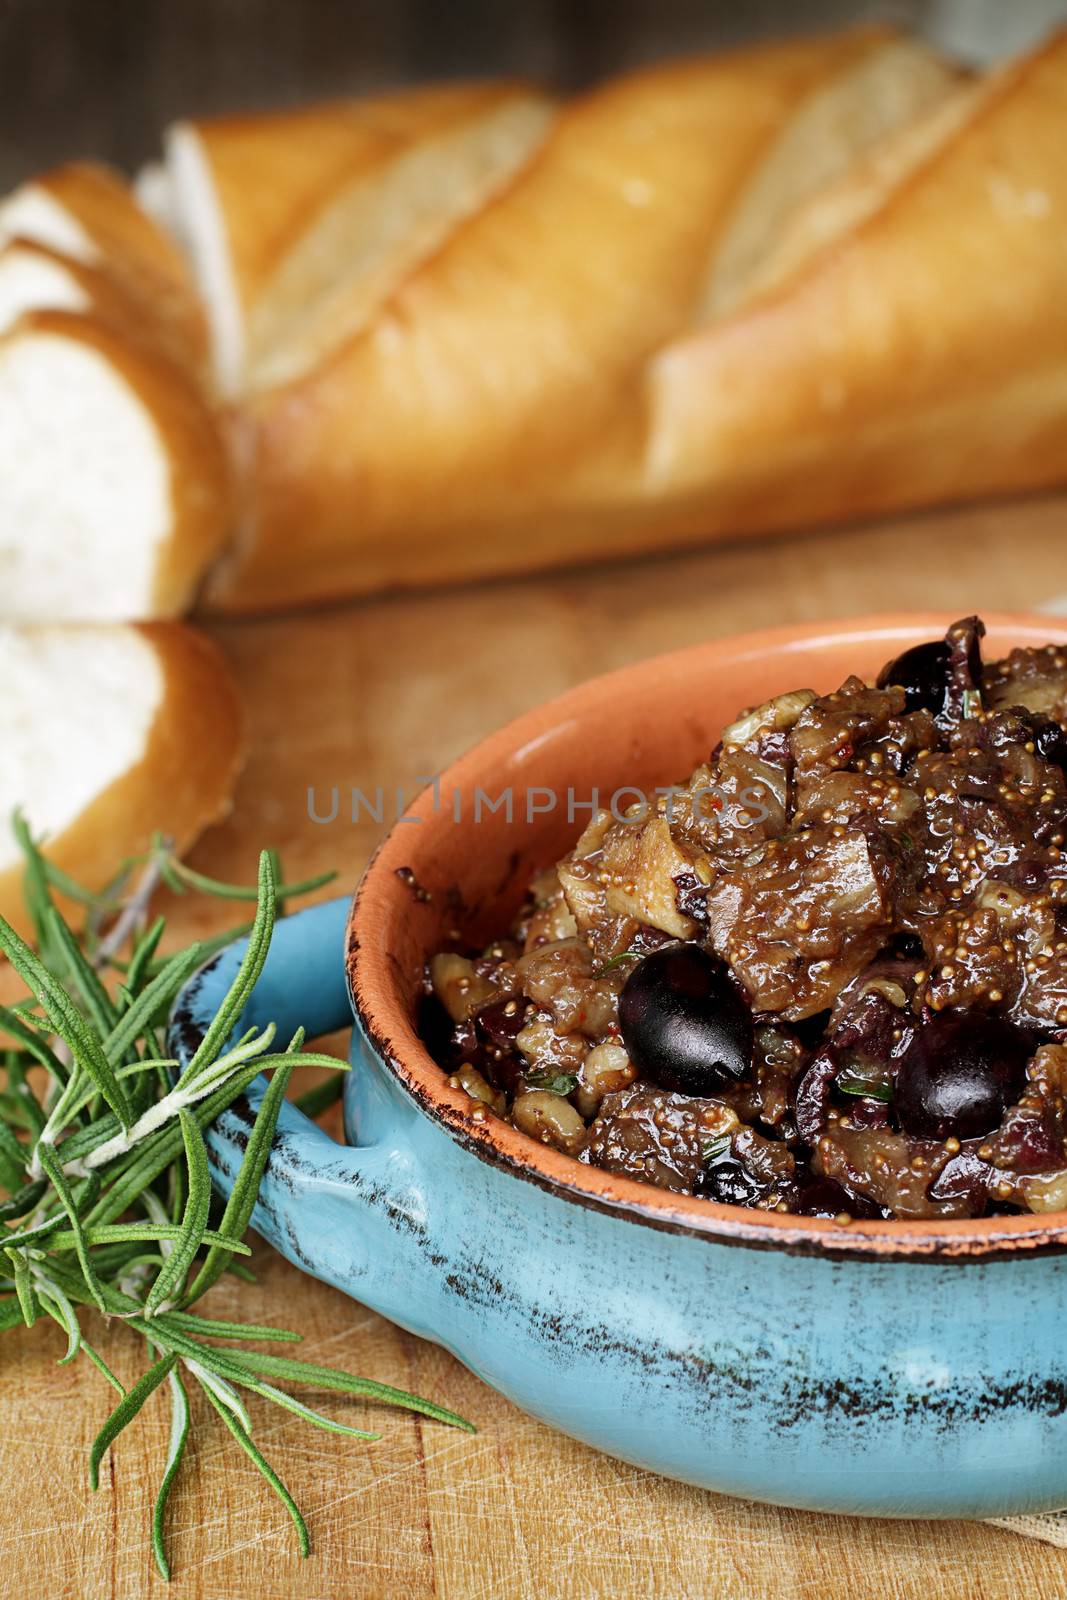 Fig Tapenade prepared with figs, kalamata olives and fresh herbs.